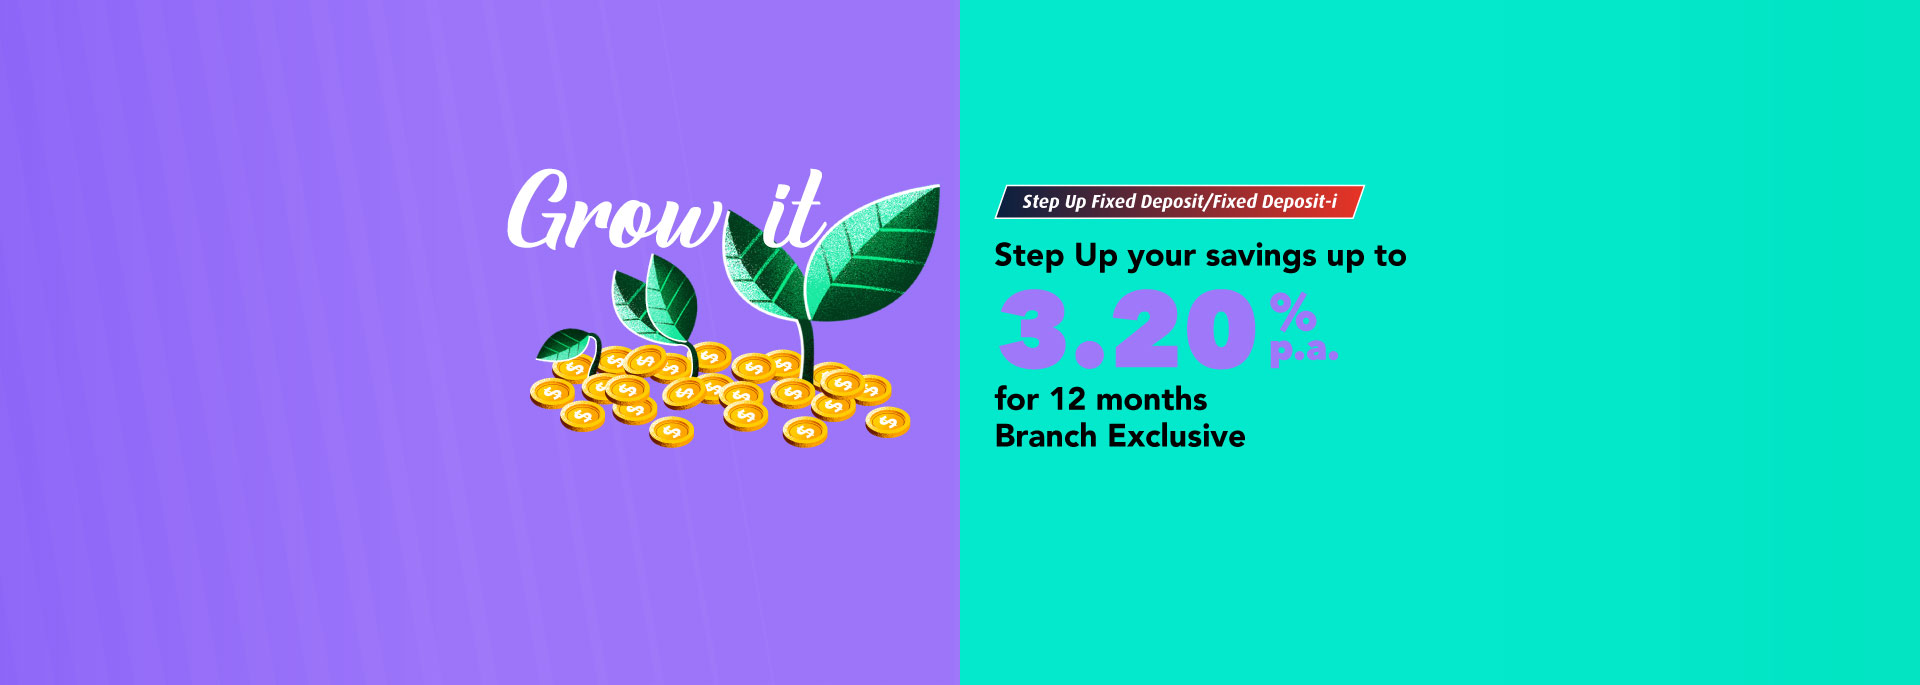 Step Up Fixed Deposit Promotion